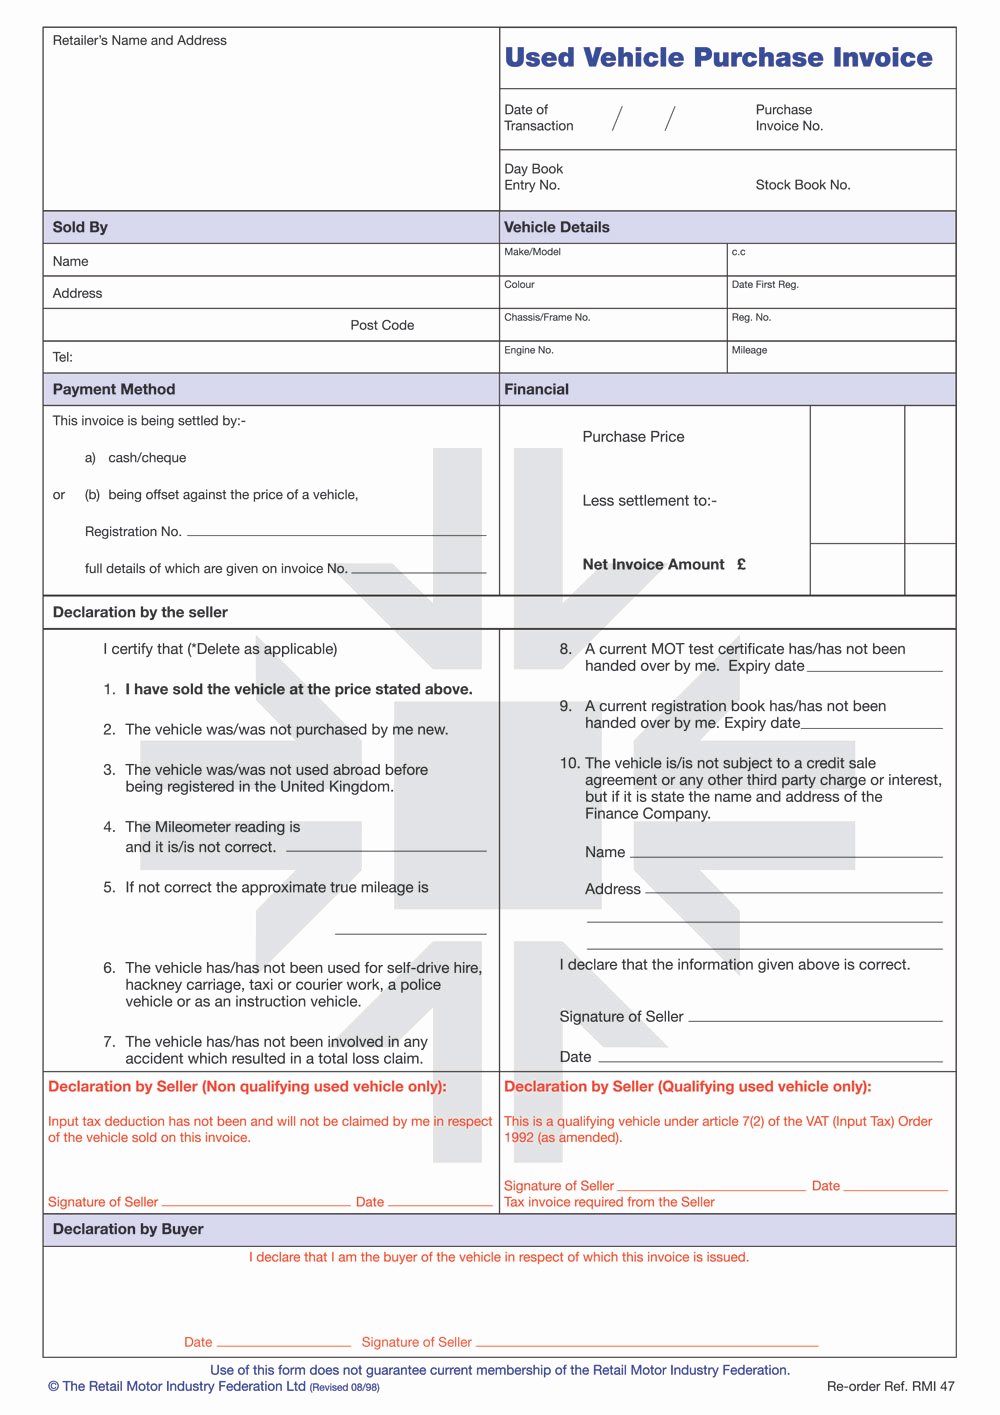 Vehicle Purchase order Template Inspirational Rmi047p Used Vehicle Purchase Invoice Pad Rmi Webshop